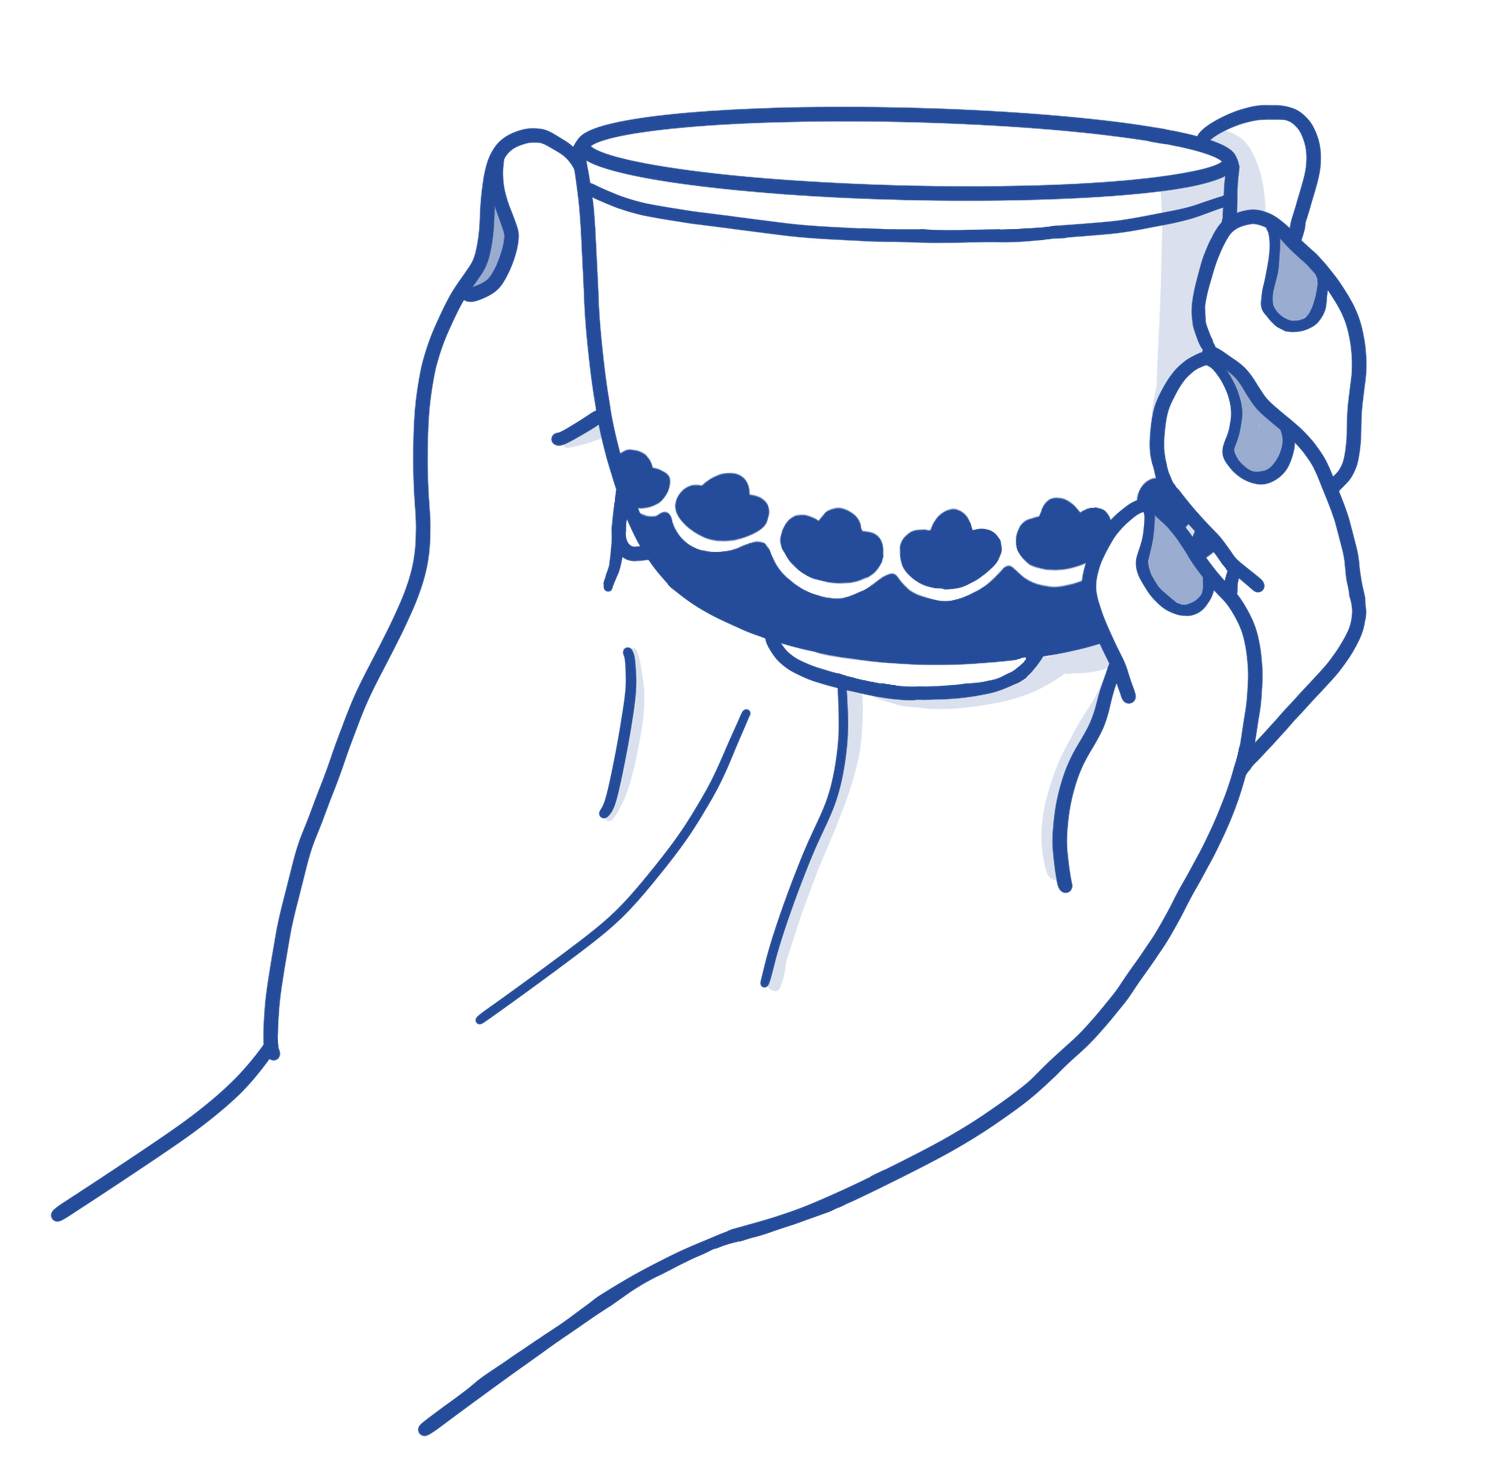 Illustration of a hand holding a teacup 